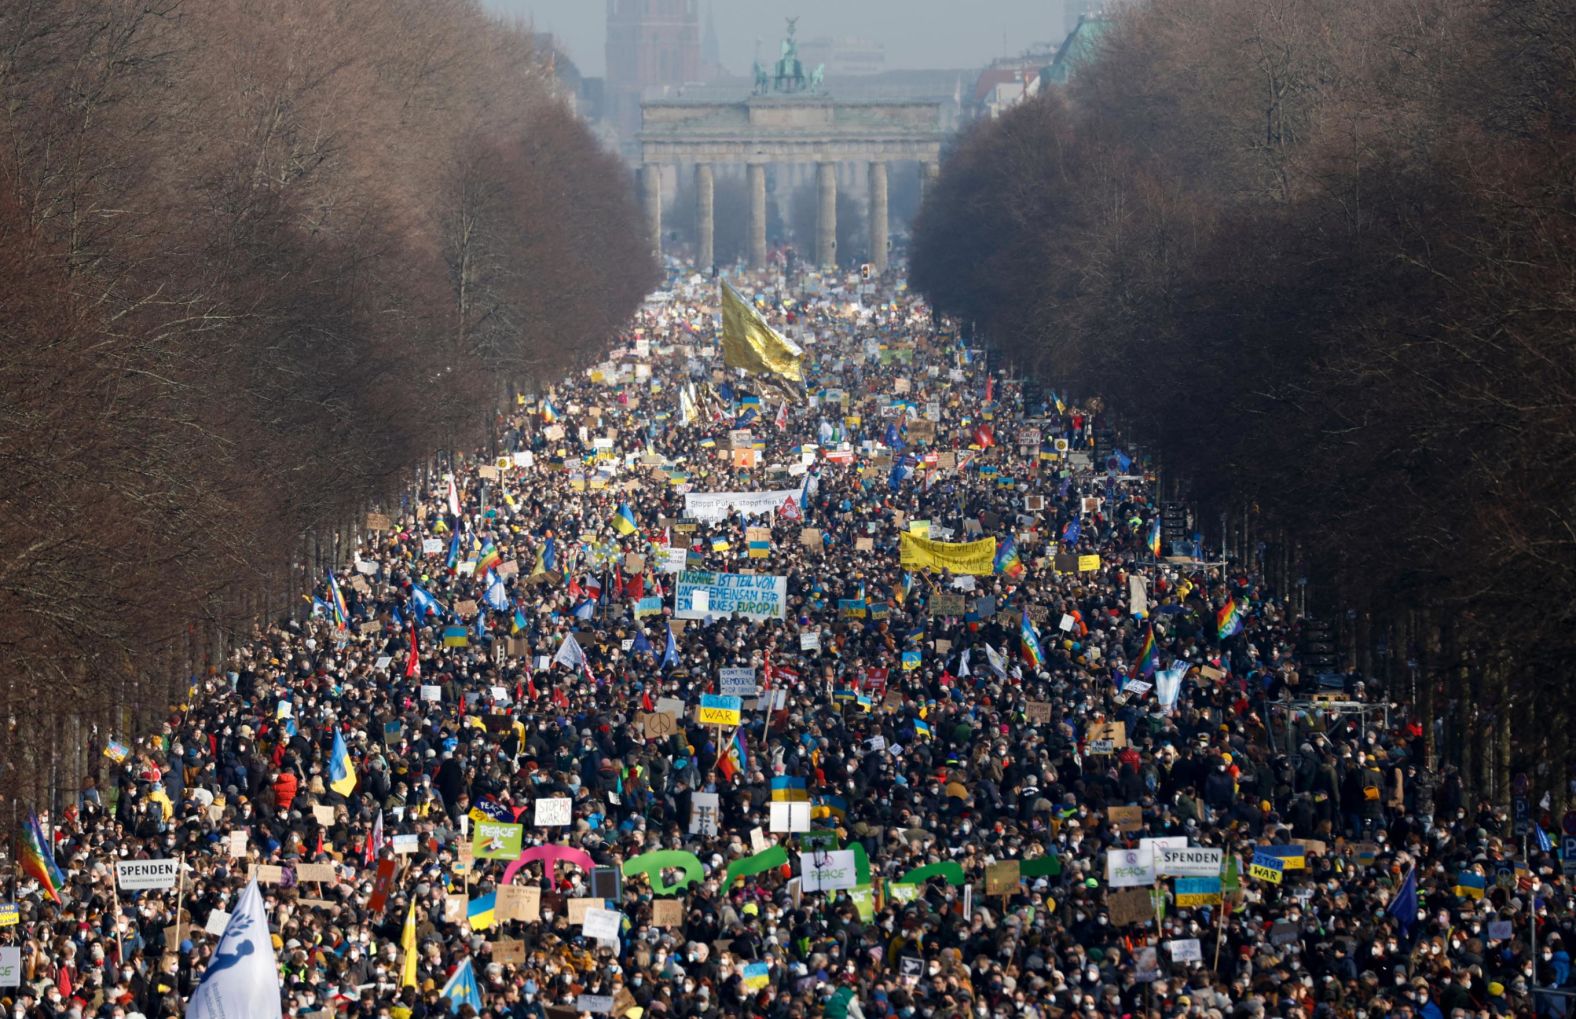 Thousands of protesters gather in Berlin's Tiergarten park on February 27.